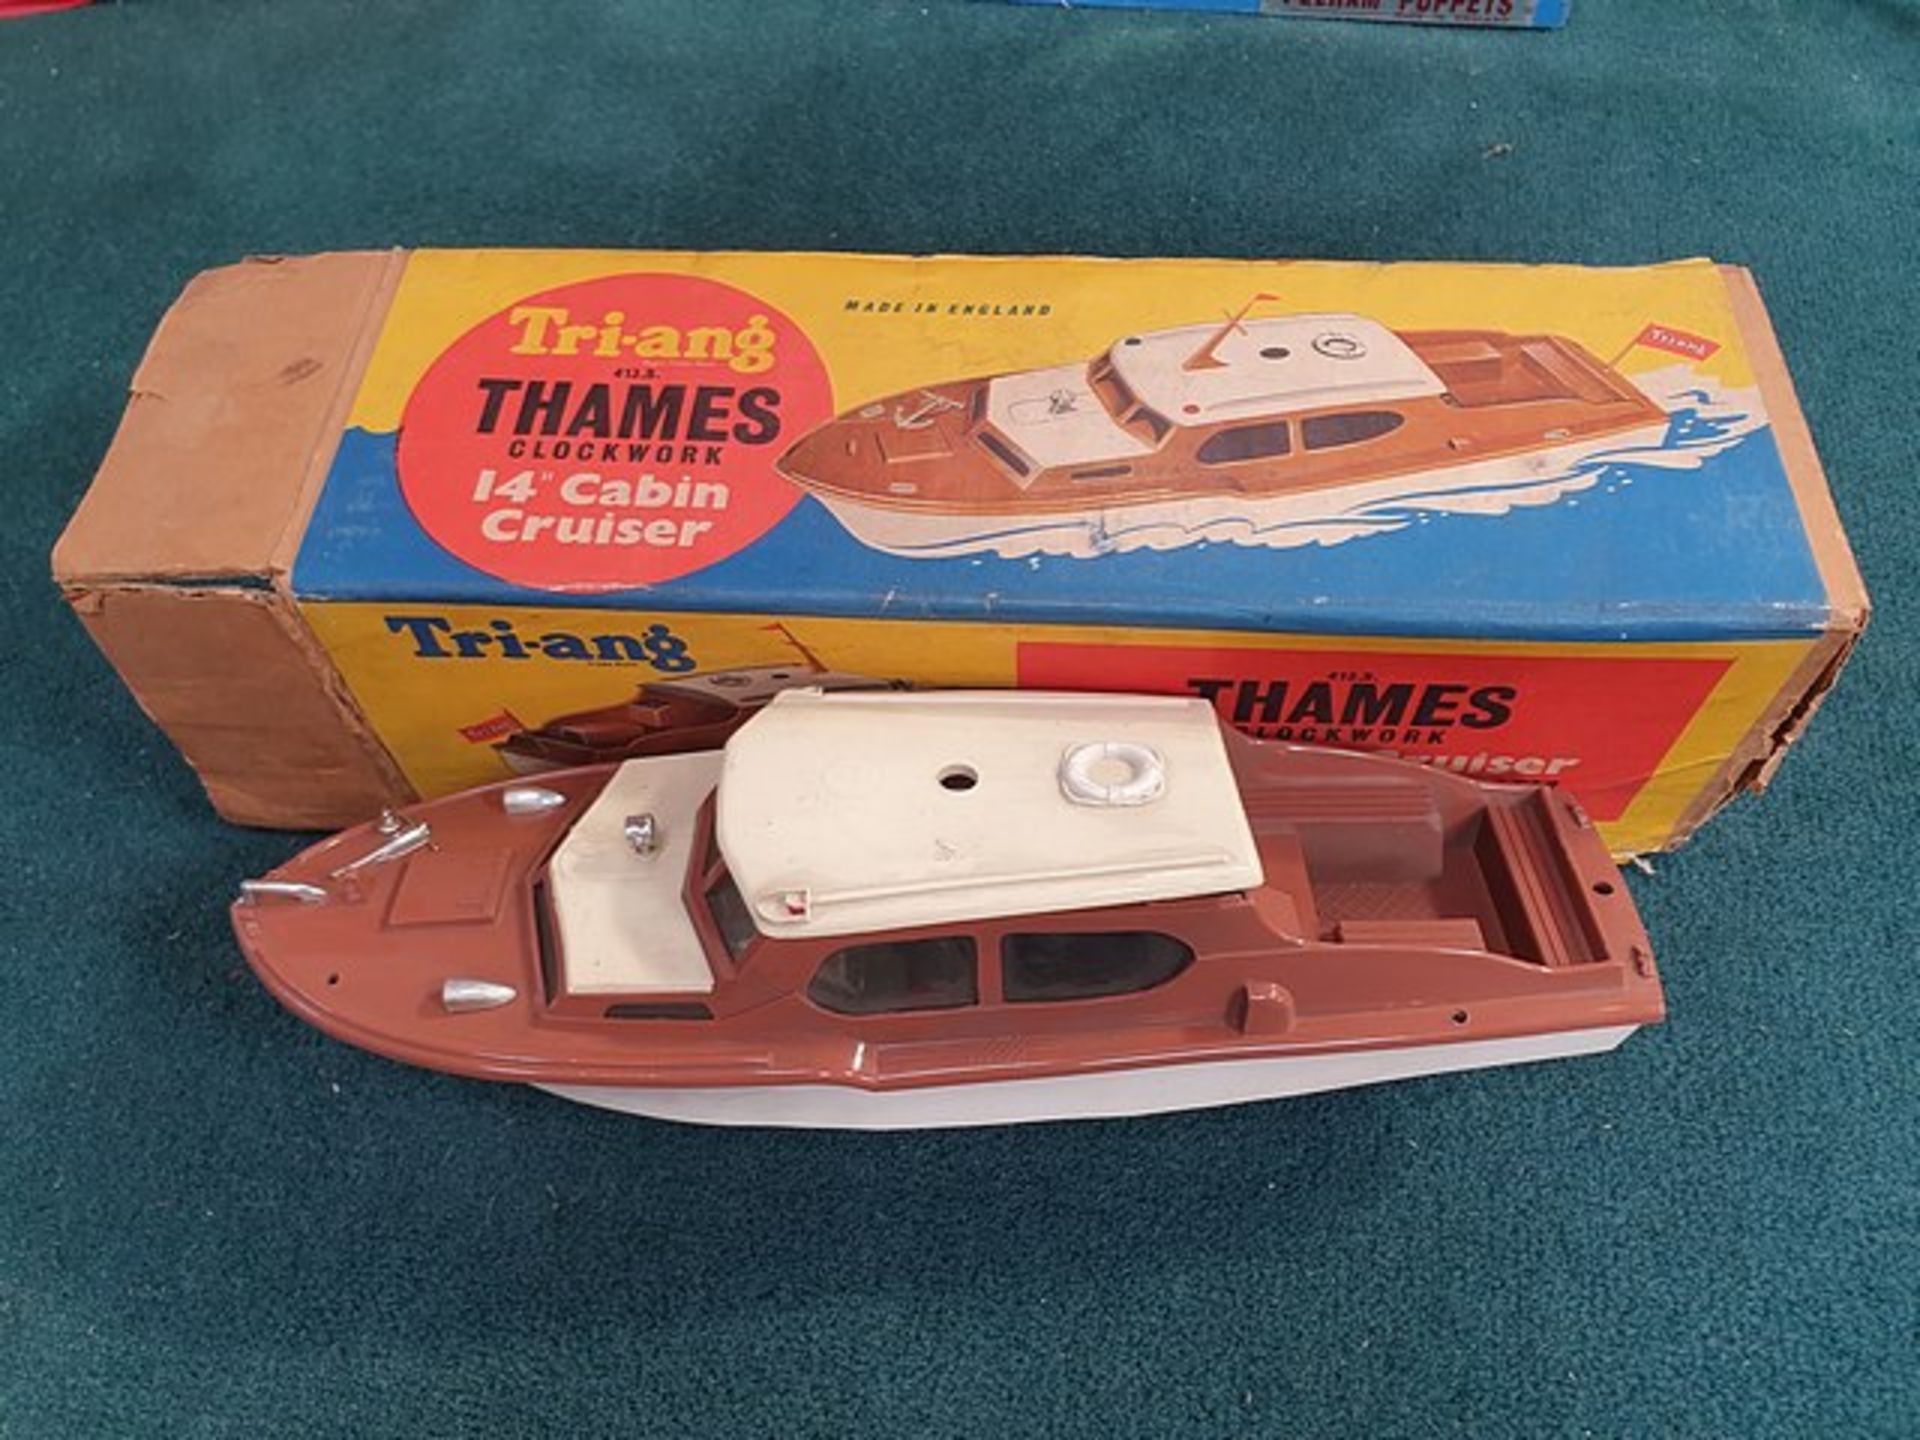 Tri-Ang 413.S. Thames Clockwork 14" Cabin Cruiser Complete In Box